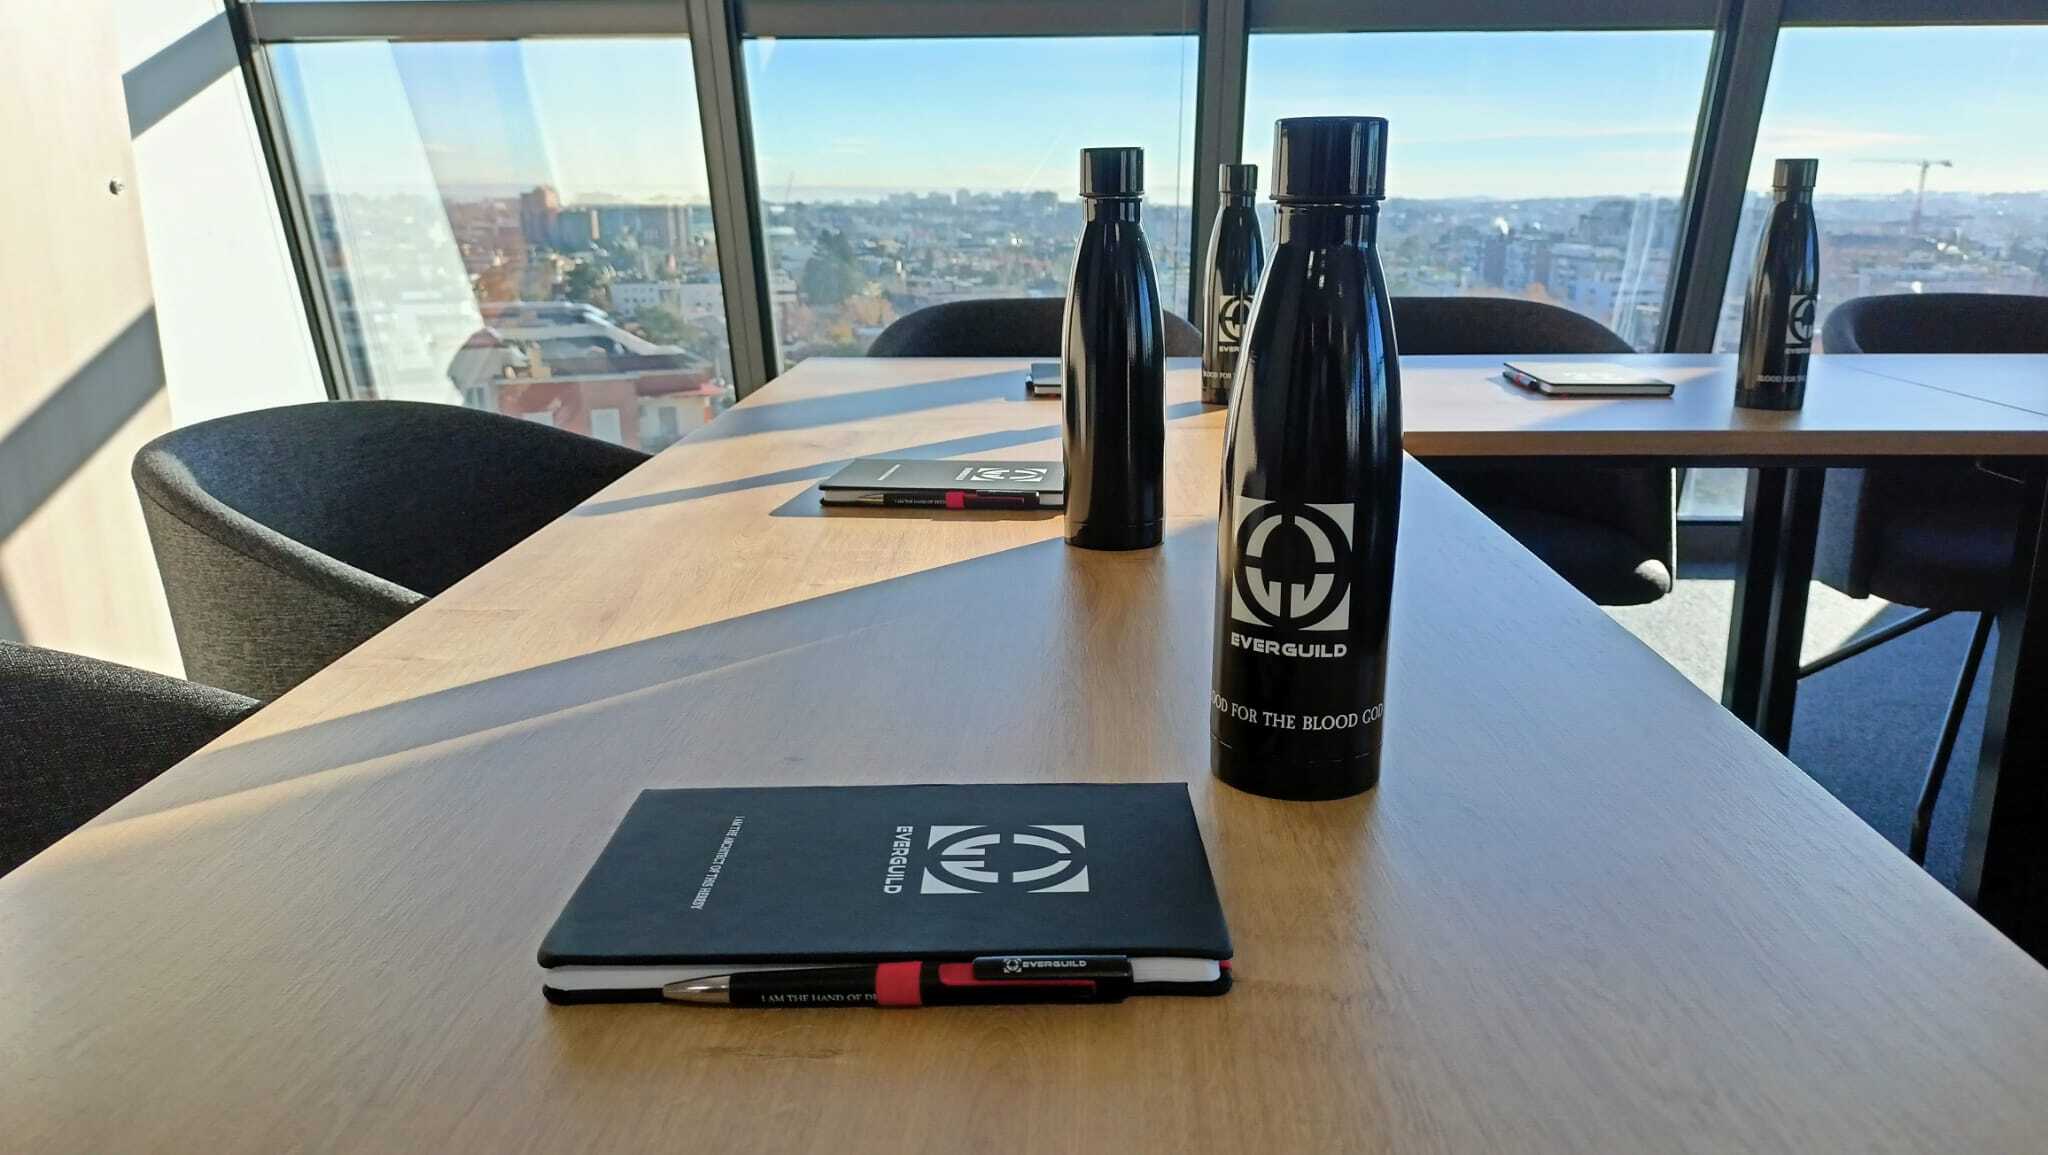 There are a few bottles and a notebook in colour black with the Everguild logo printed on them, white over black. These things are laying on a table in a bright office room.